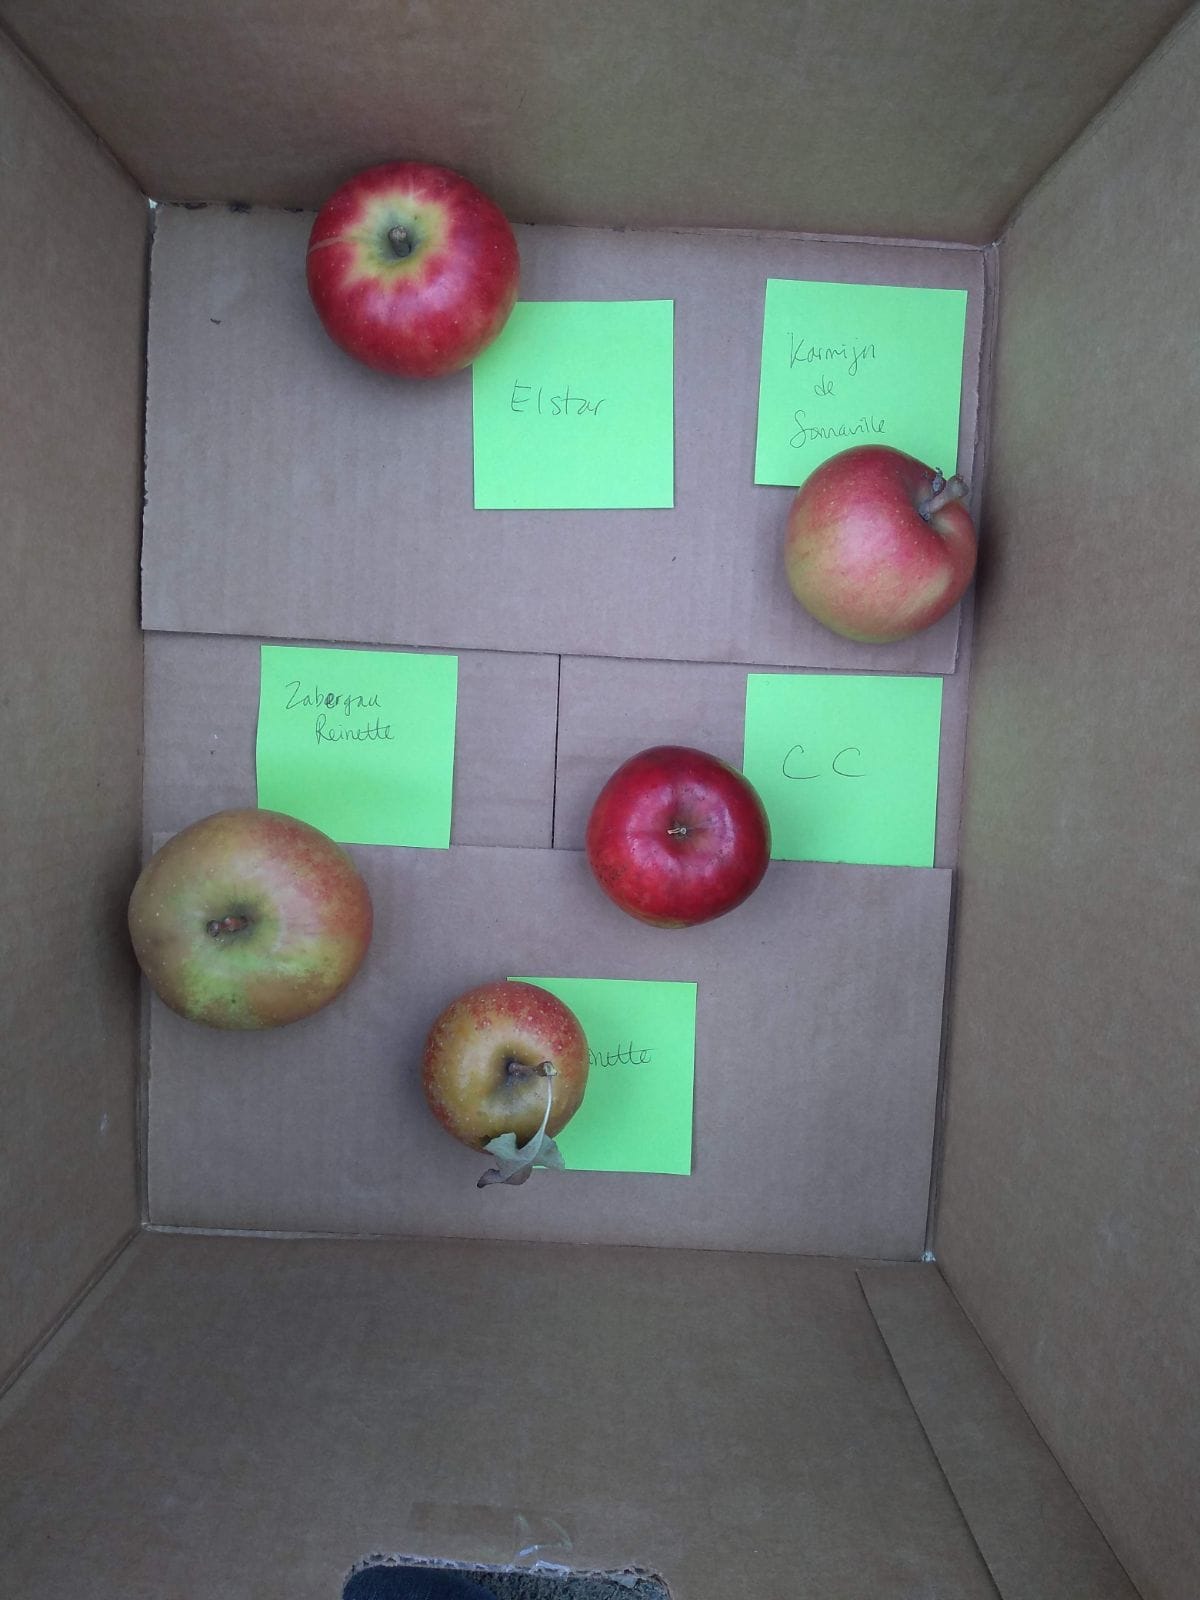 A cardboard box with apples with a green note telling what they are.